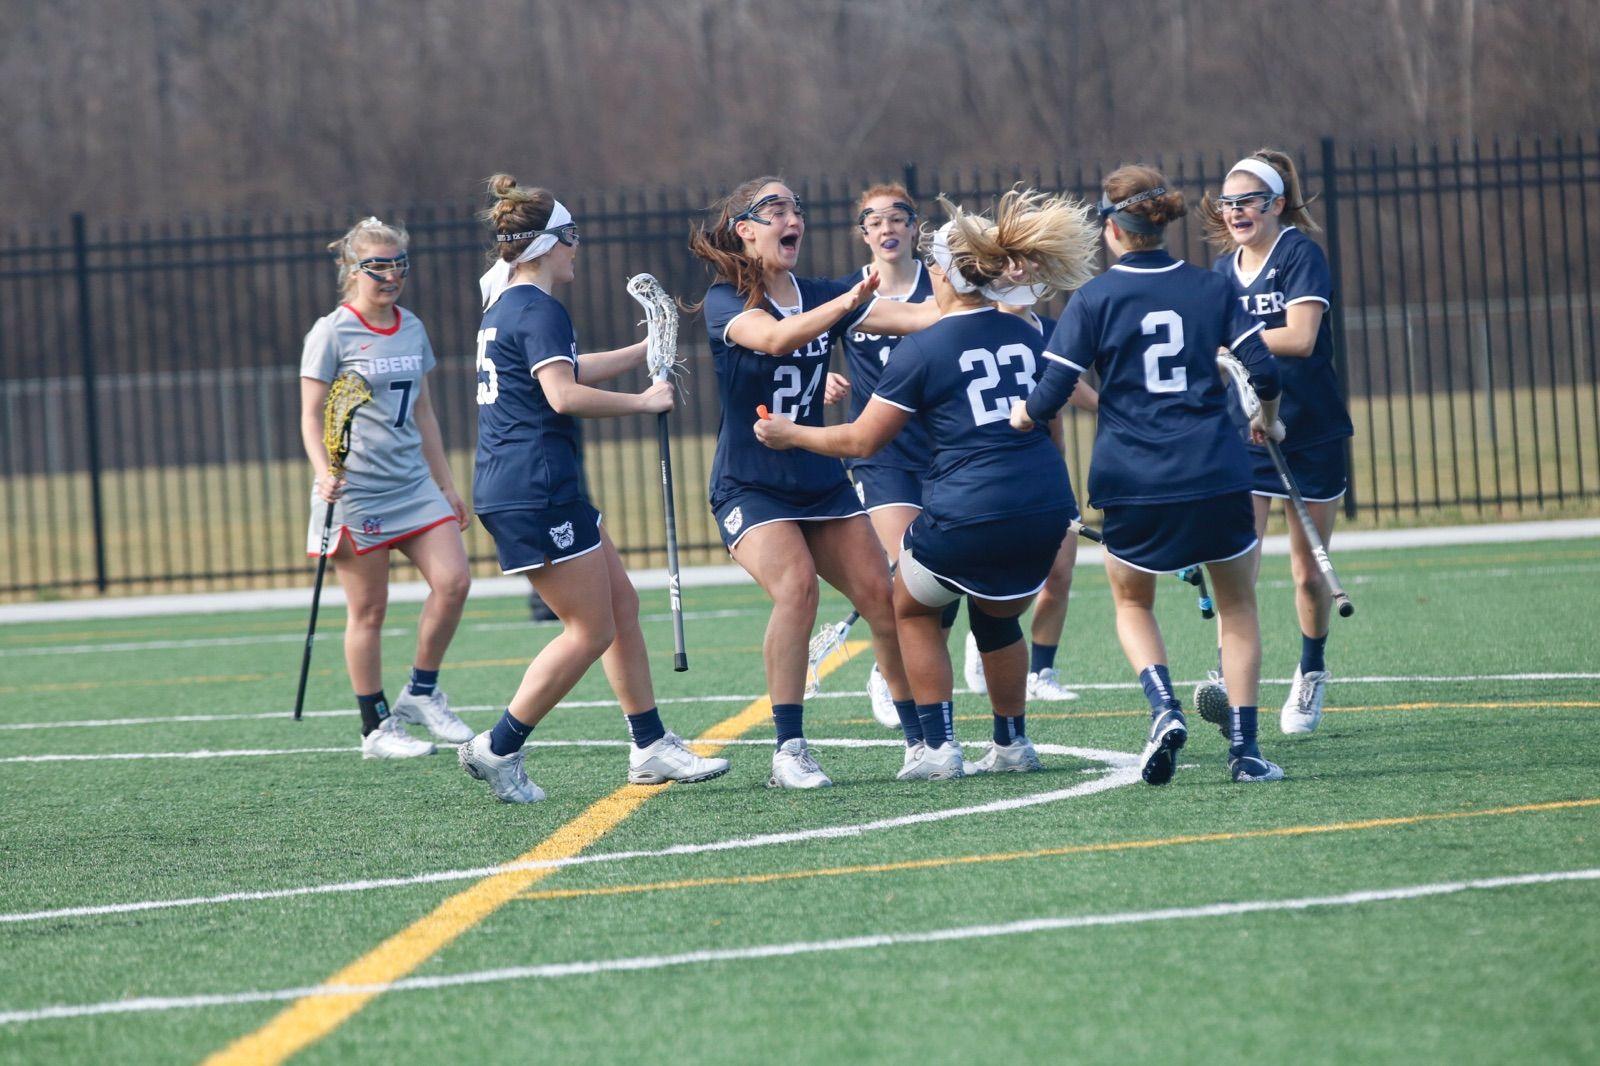 Butler lacrosse players from different background unite through